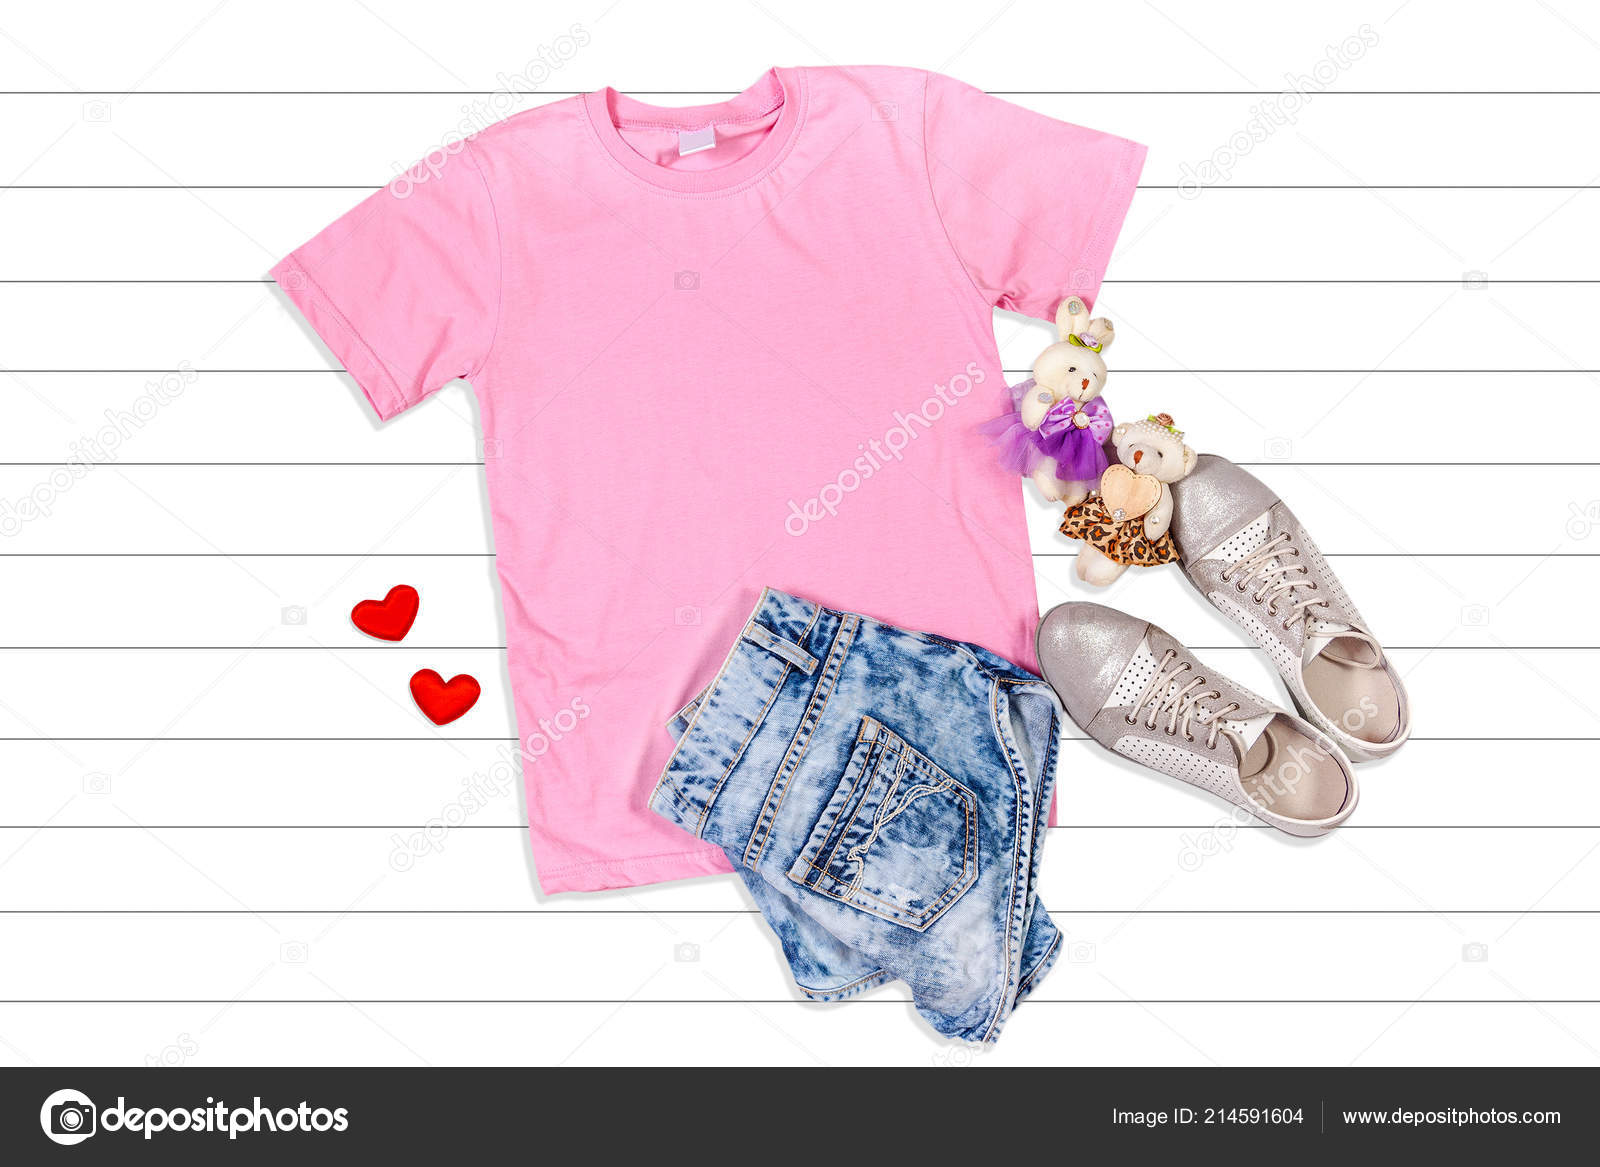 Download Pink T Shirt On A White Wooden Background Stock Photo Image By C Flipper1971 214591604